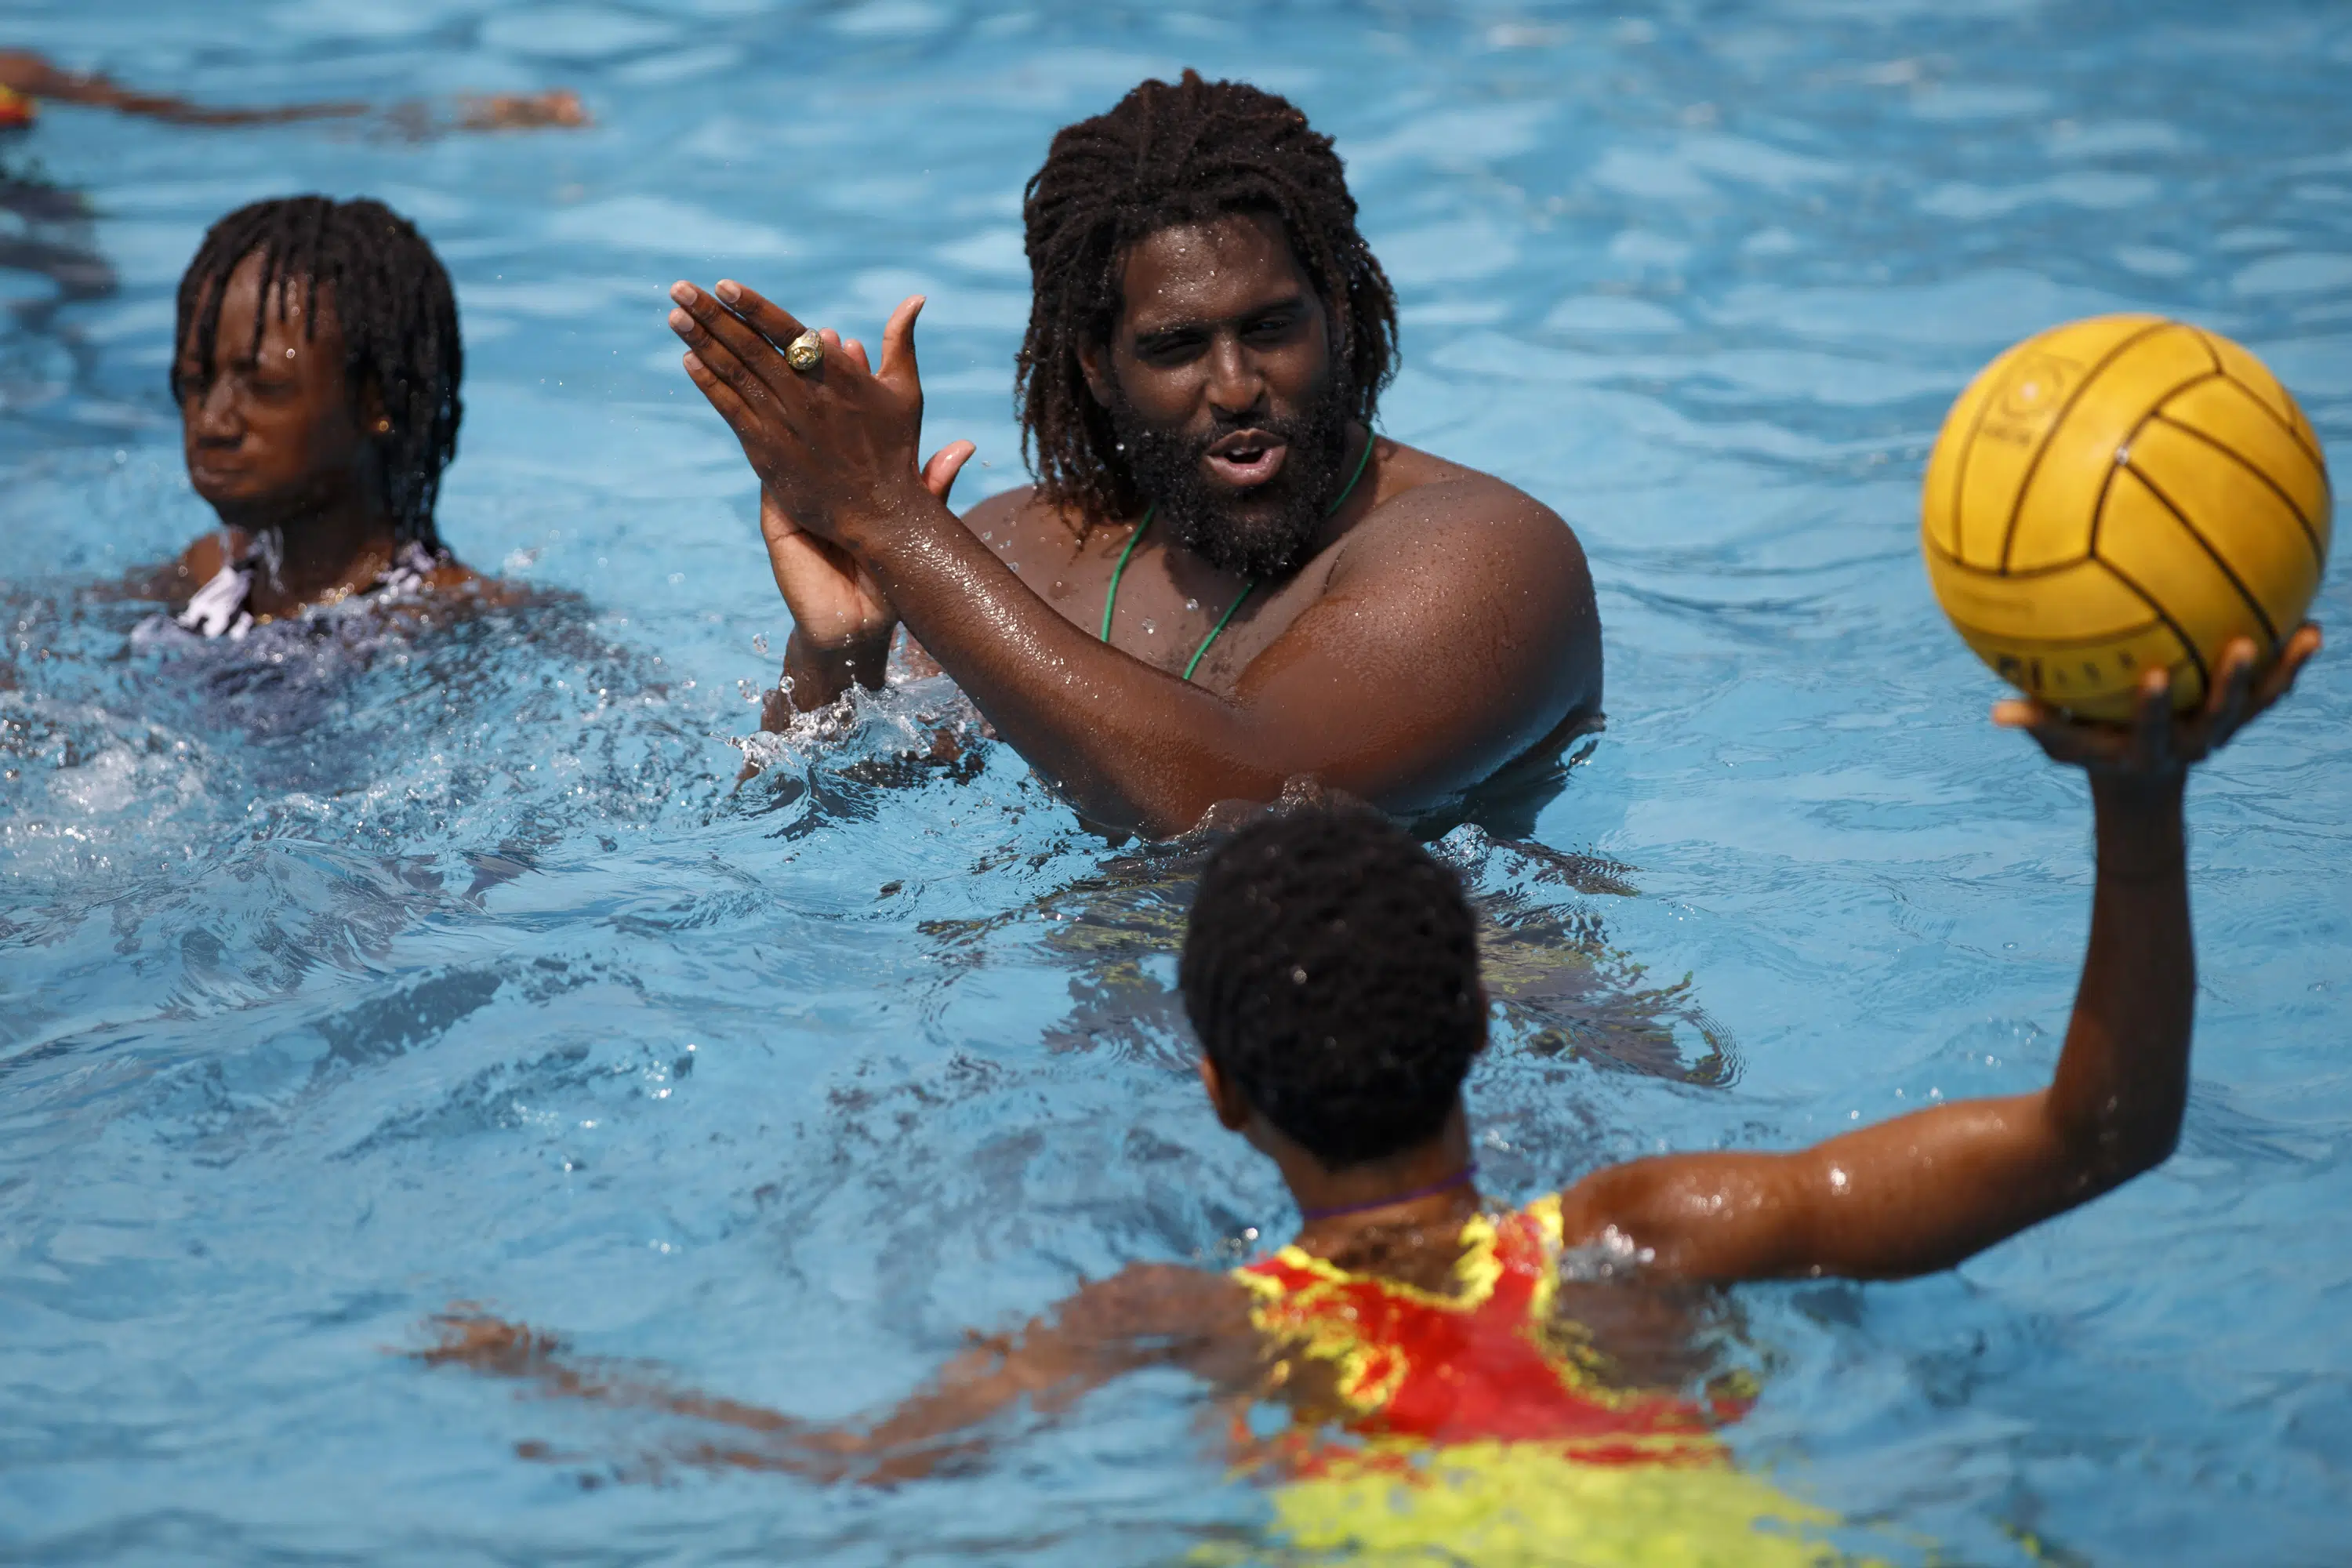 Ghana water polo grows as sport looks for more diversity